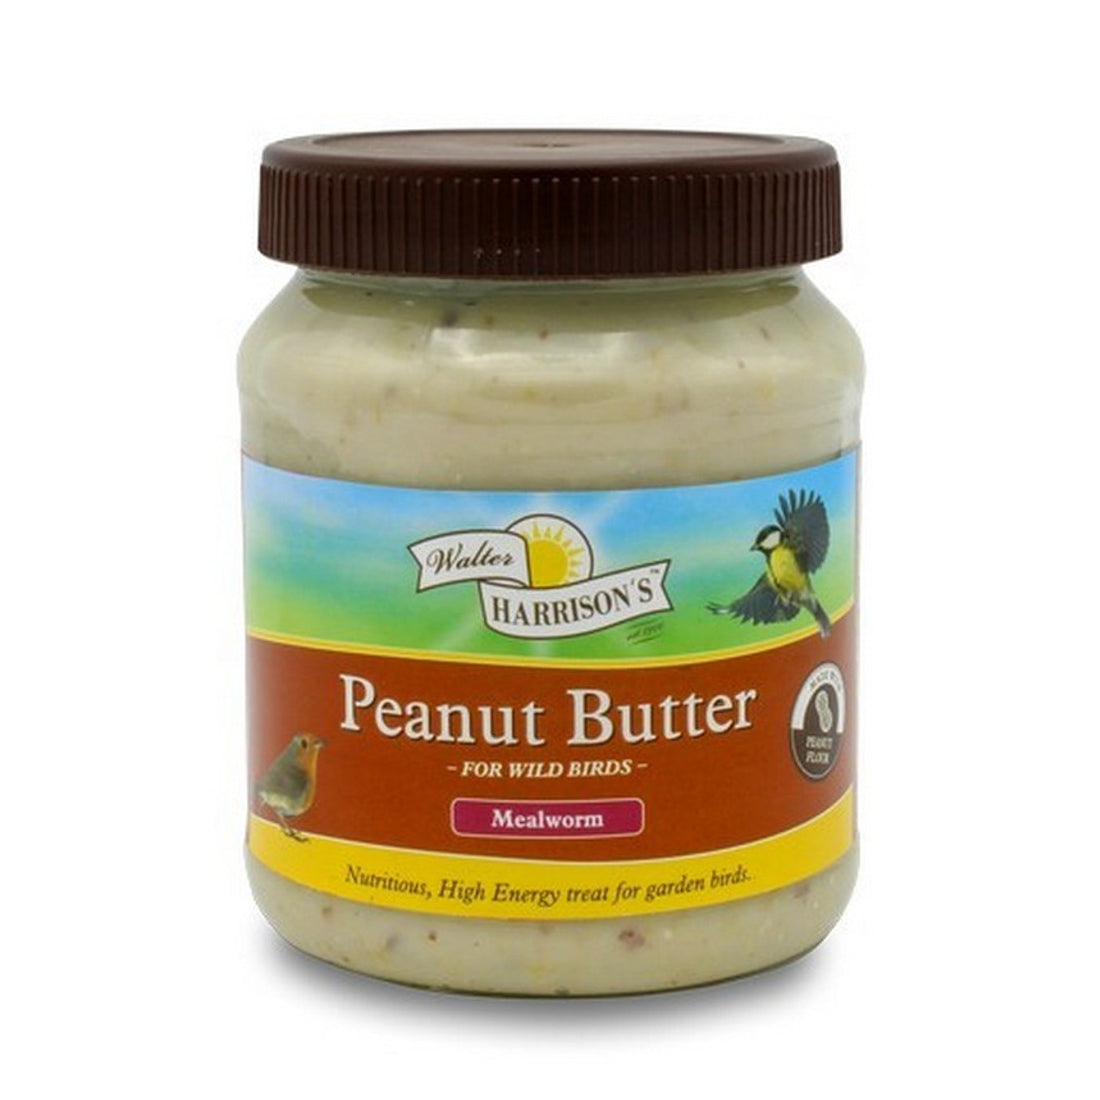 Walter Harrisons Peanut Butter Jar with Mealworms 330g